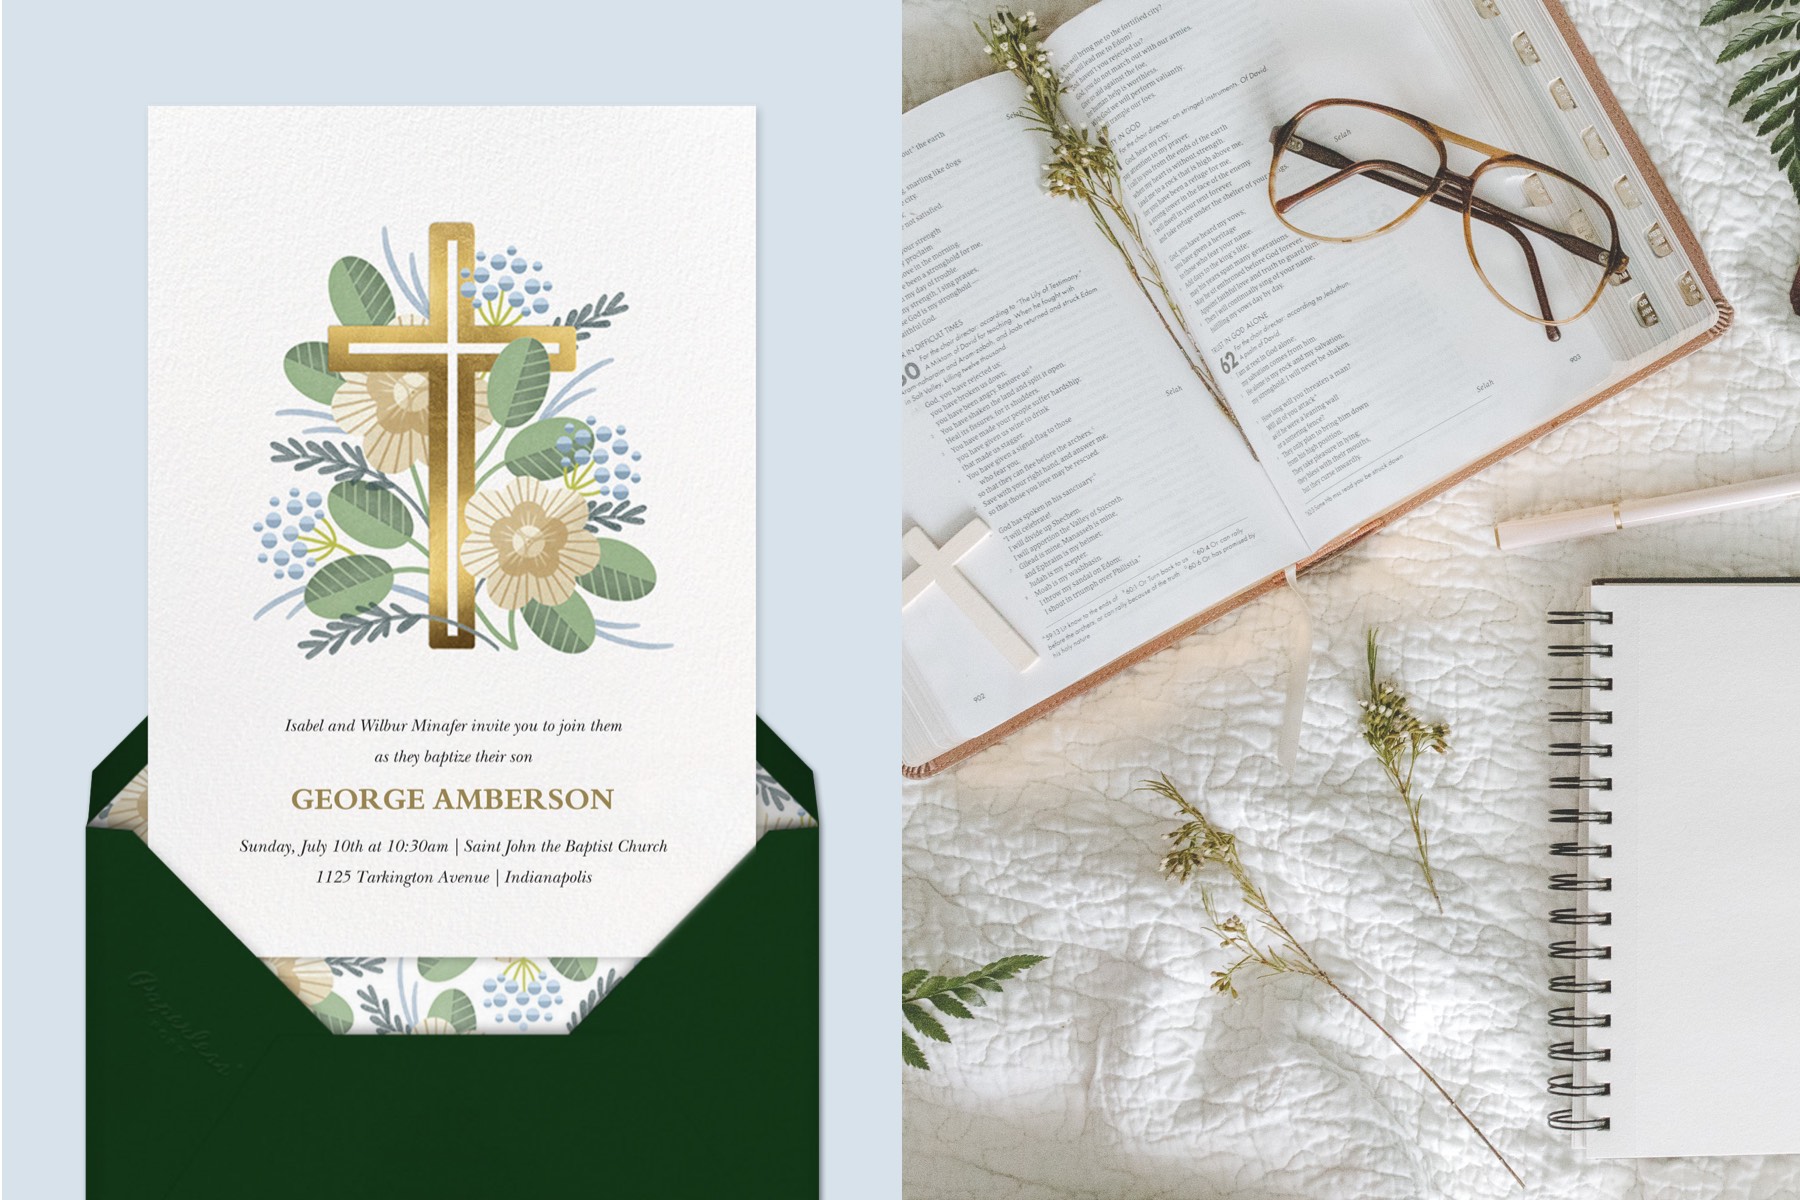 left: A card showing a gold cross surrounded by flowers. Right: An open bible with sprigs of greenery, eyeglasses, and a small cross. 